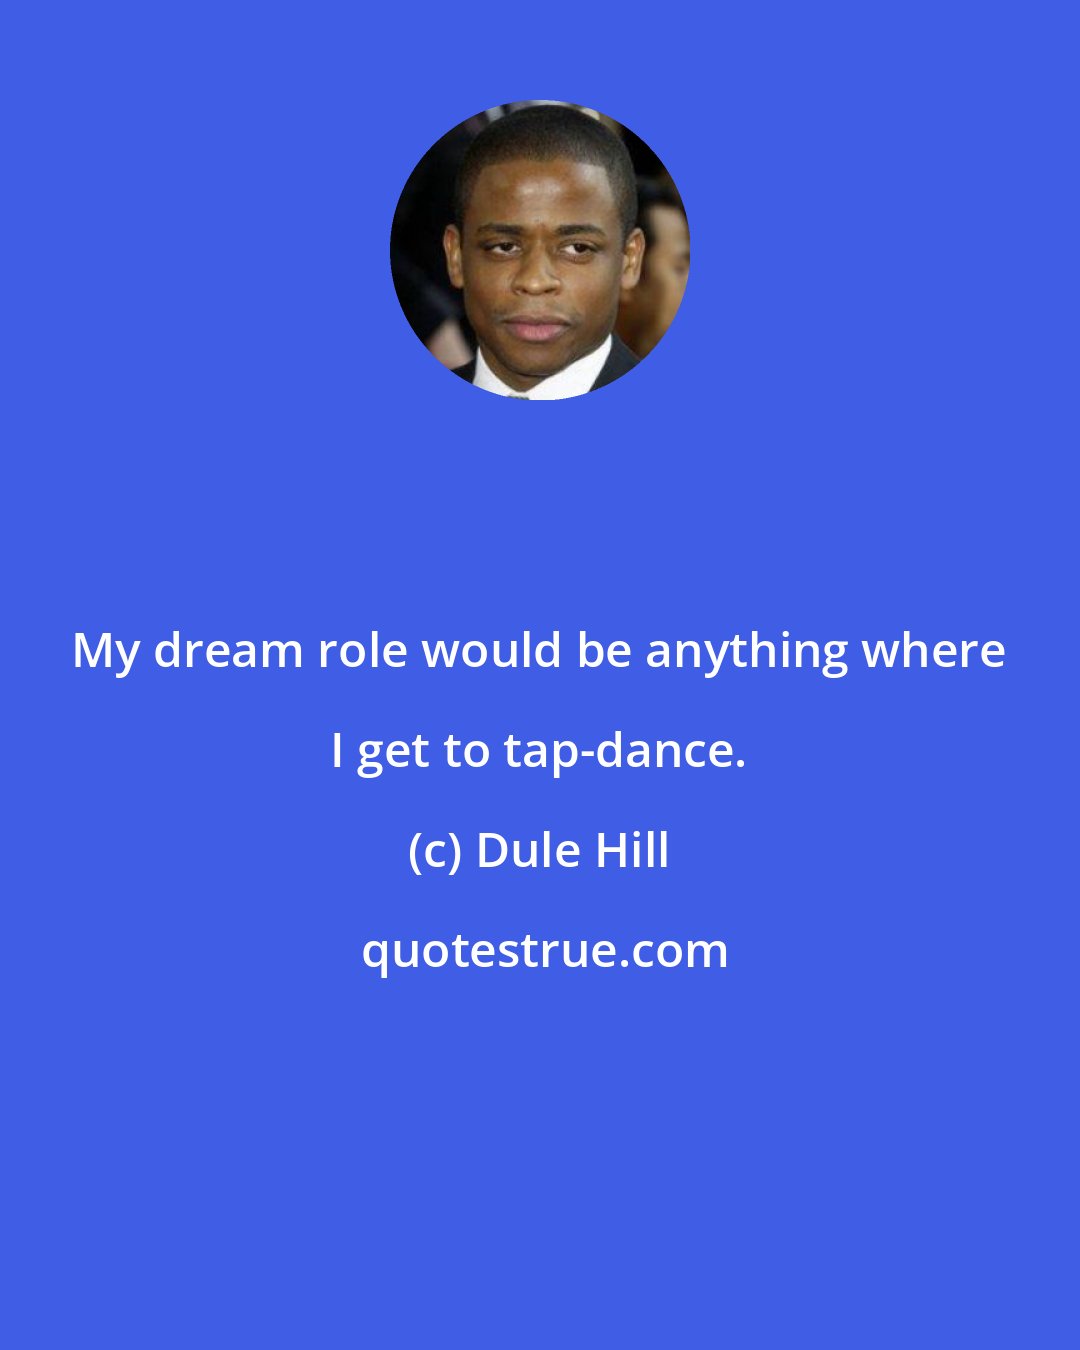 Dule Hill: My dream role would be anything where I get to tap-dance.